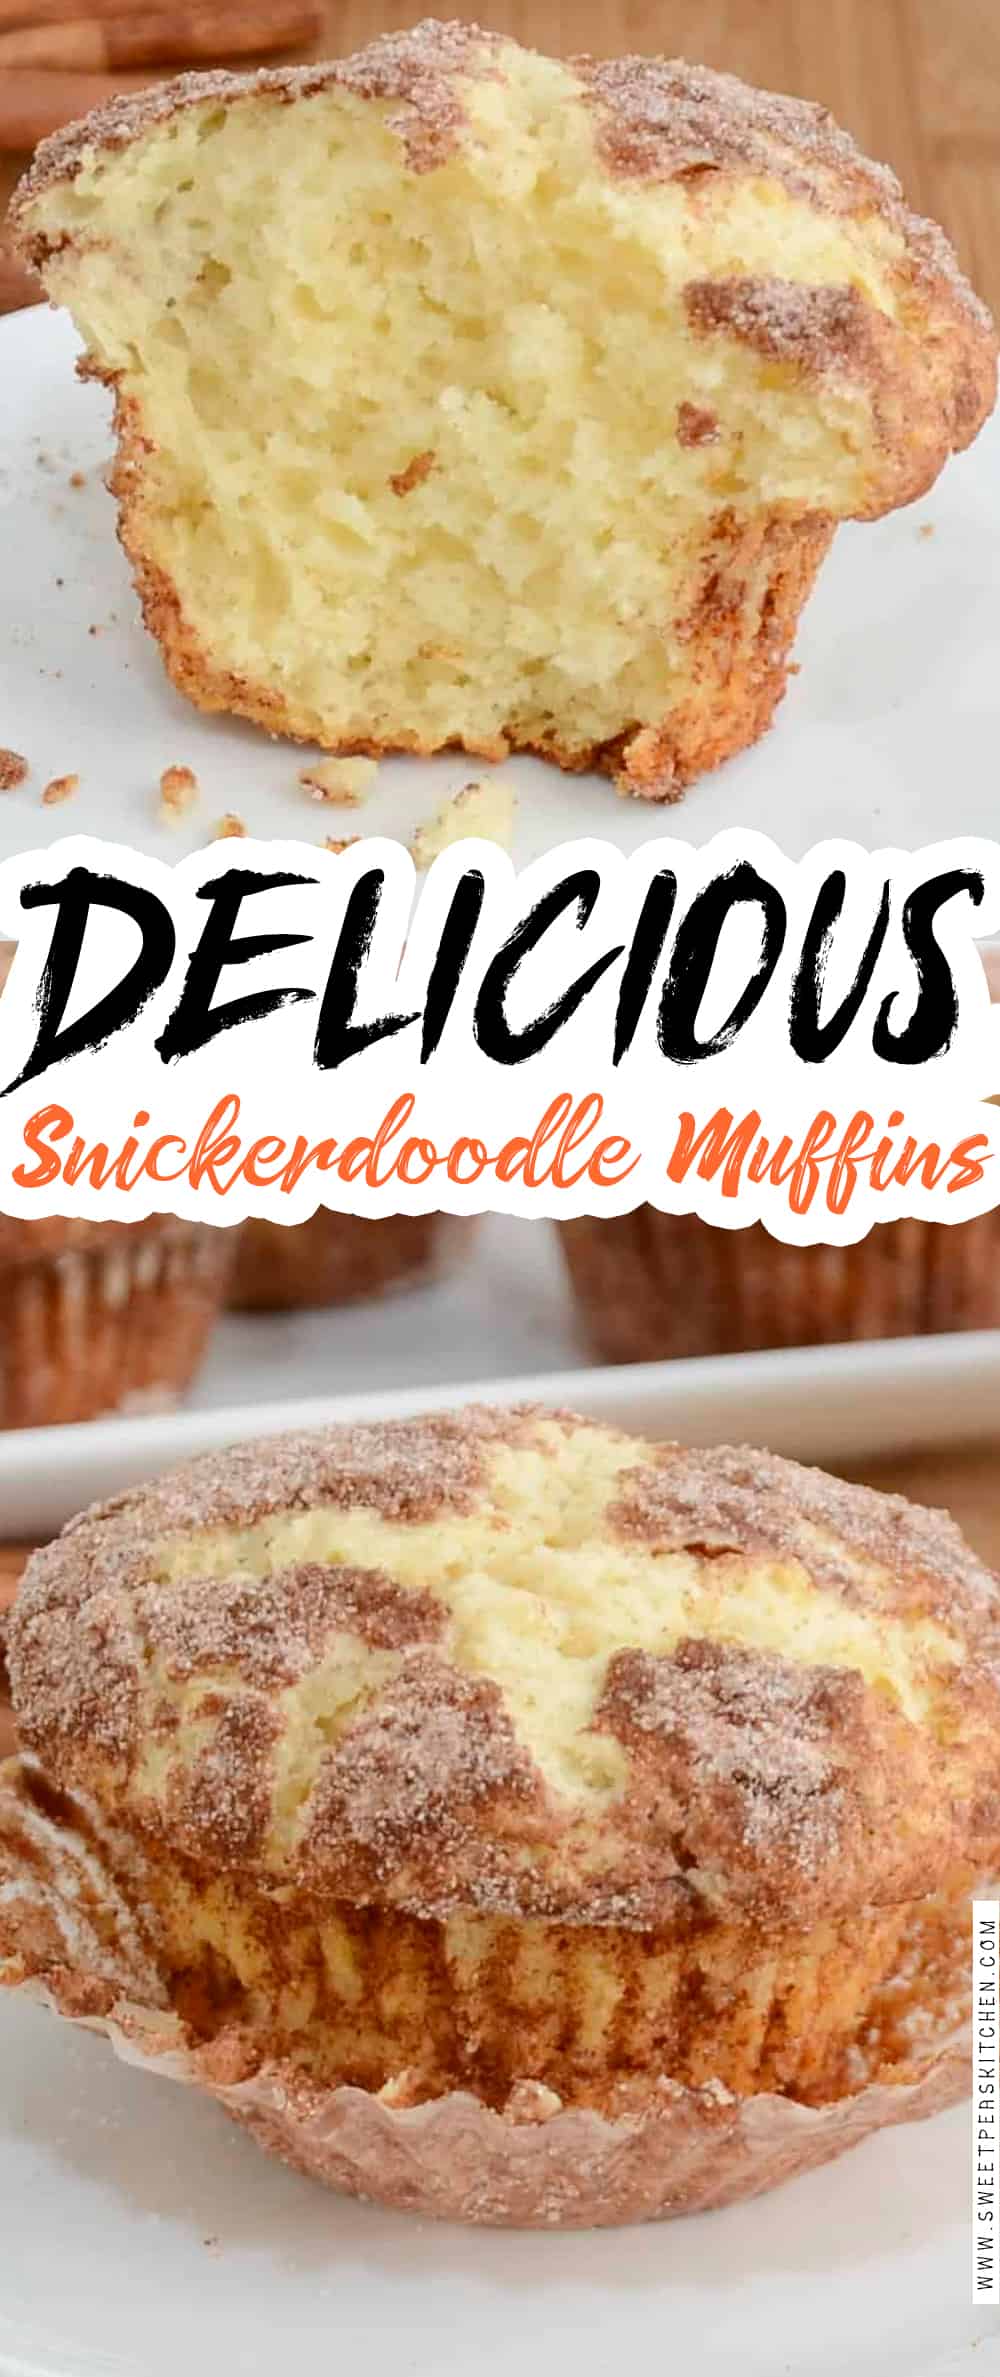 Snickerdoodle Muffins, sweet muffins on pinterest